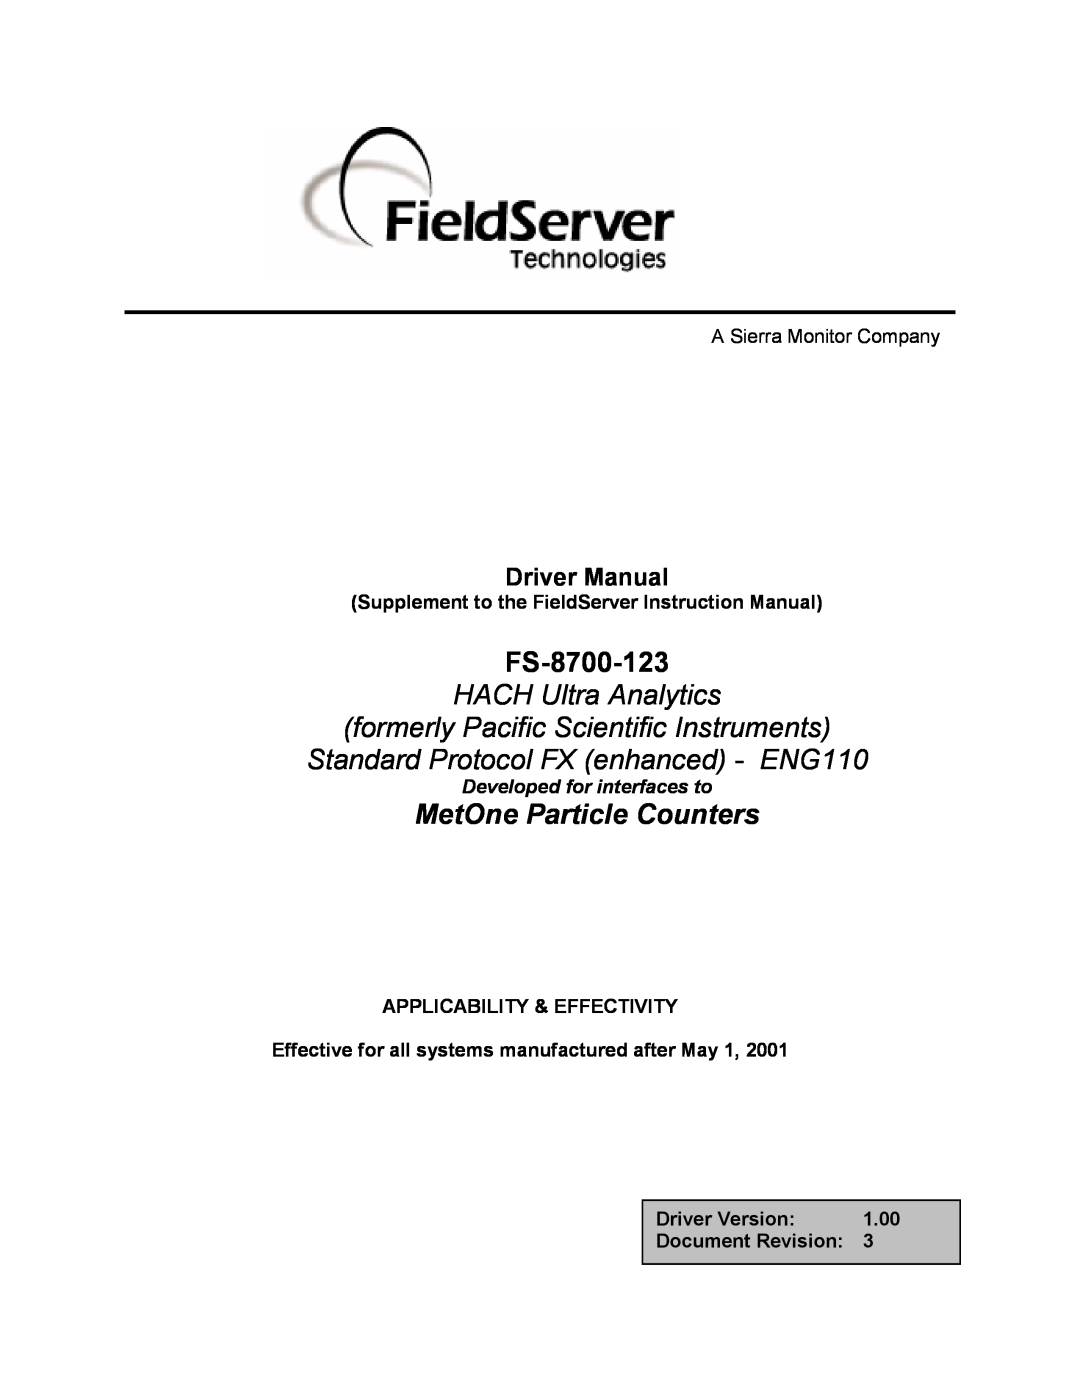 FieldServer instruction manual FS-8700-123 HACH Ultra Analytics, formerly Pacific Scientific Instruments, Driver Manual 